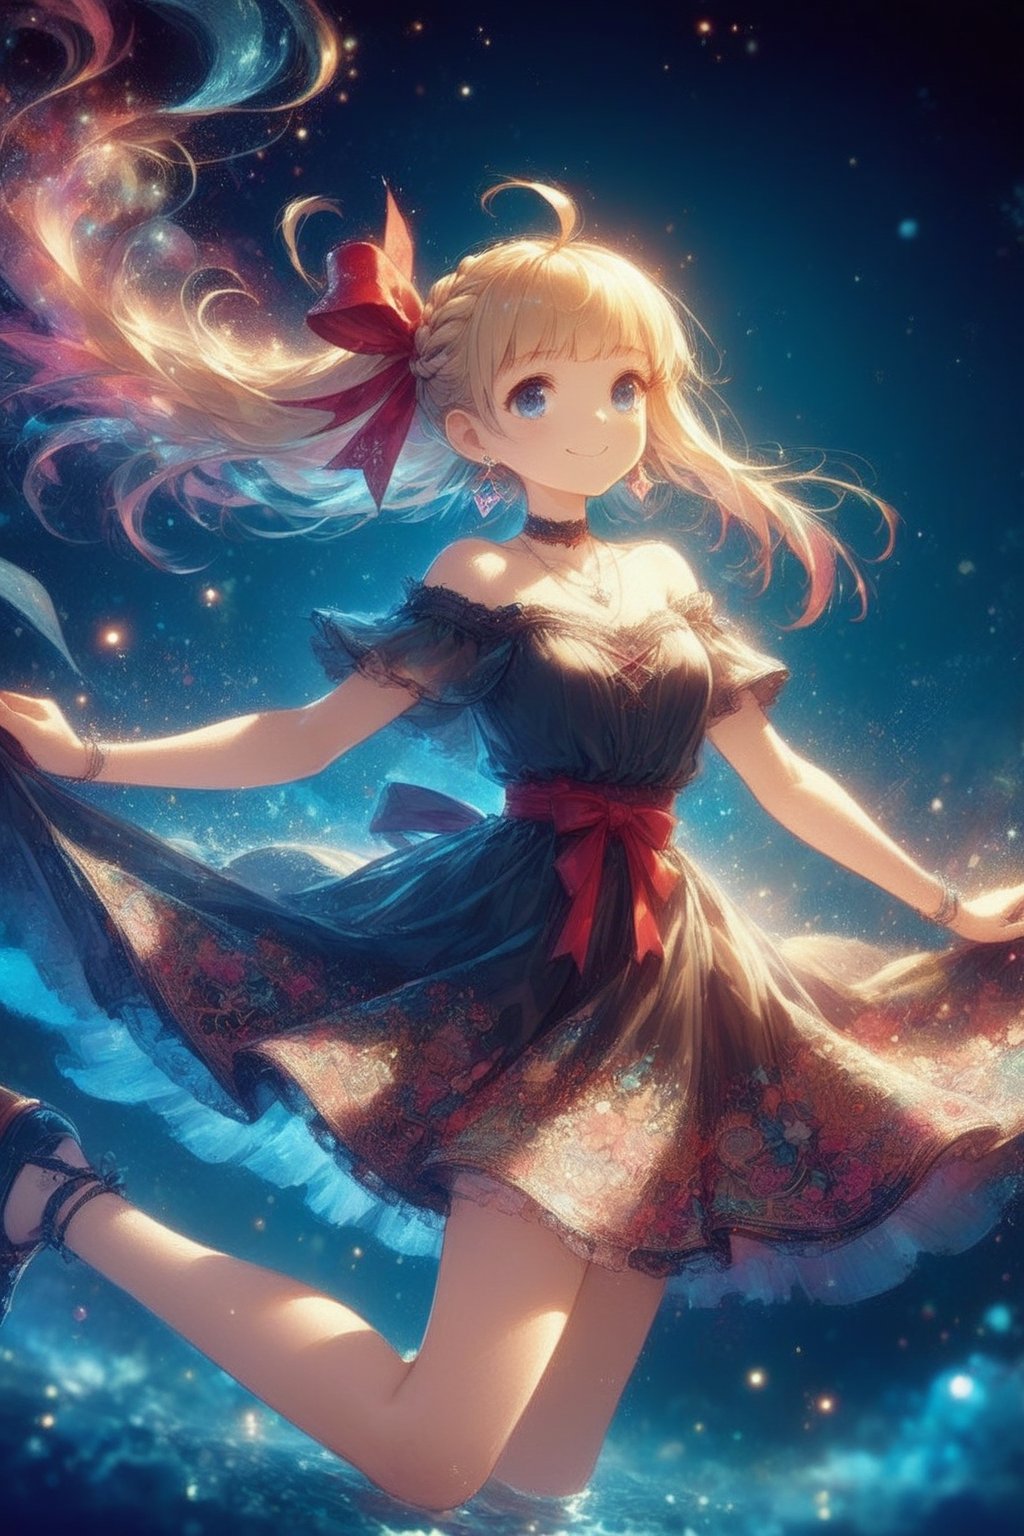 masterpiece, best quality, high quality, exquisite, detailed, beautiful, background, wonderland, flower garden, girl, witch, cute creature, phoenix, feather texture, smoke texture, parametric pattern, concept art, fun, grinning, floating, flying, looking at viewer, looking right, front view, hime cut, blunt bangs, ahoge, french braid, pink hair, blonde, brown eyes, blue eyes, with iris, slender, attractive, dress, off shoulder, undressed, hair ribbon, earrings, choker, necklace, ribbon, holding wand, cute face, epic fight scene, fun scene, gradient black background, holding flowers, fantasy, kawaii punk, manga, flat illustration, heart shaped, star shaped, diamond shaped, spiral shaped, hard edges, soft surface, gouache painting, ink drawing, sharp, double exposure, lens flare, dramatic lighting, cinematic lighting, glowing, dramatic contrast, vivid colors, soft colors, cowboy shot, front view, dutch Angle shots, dynamic angles, cowboy shots, leaping figure compositions, the golden triangle